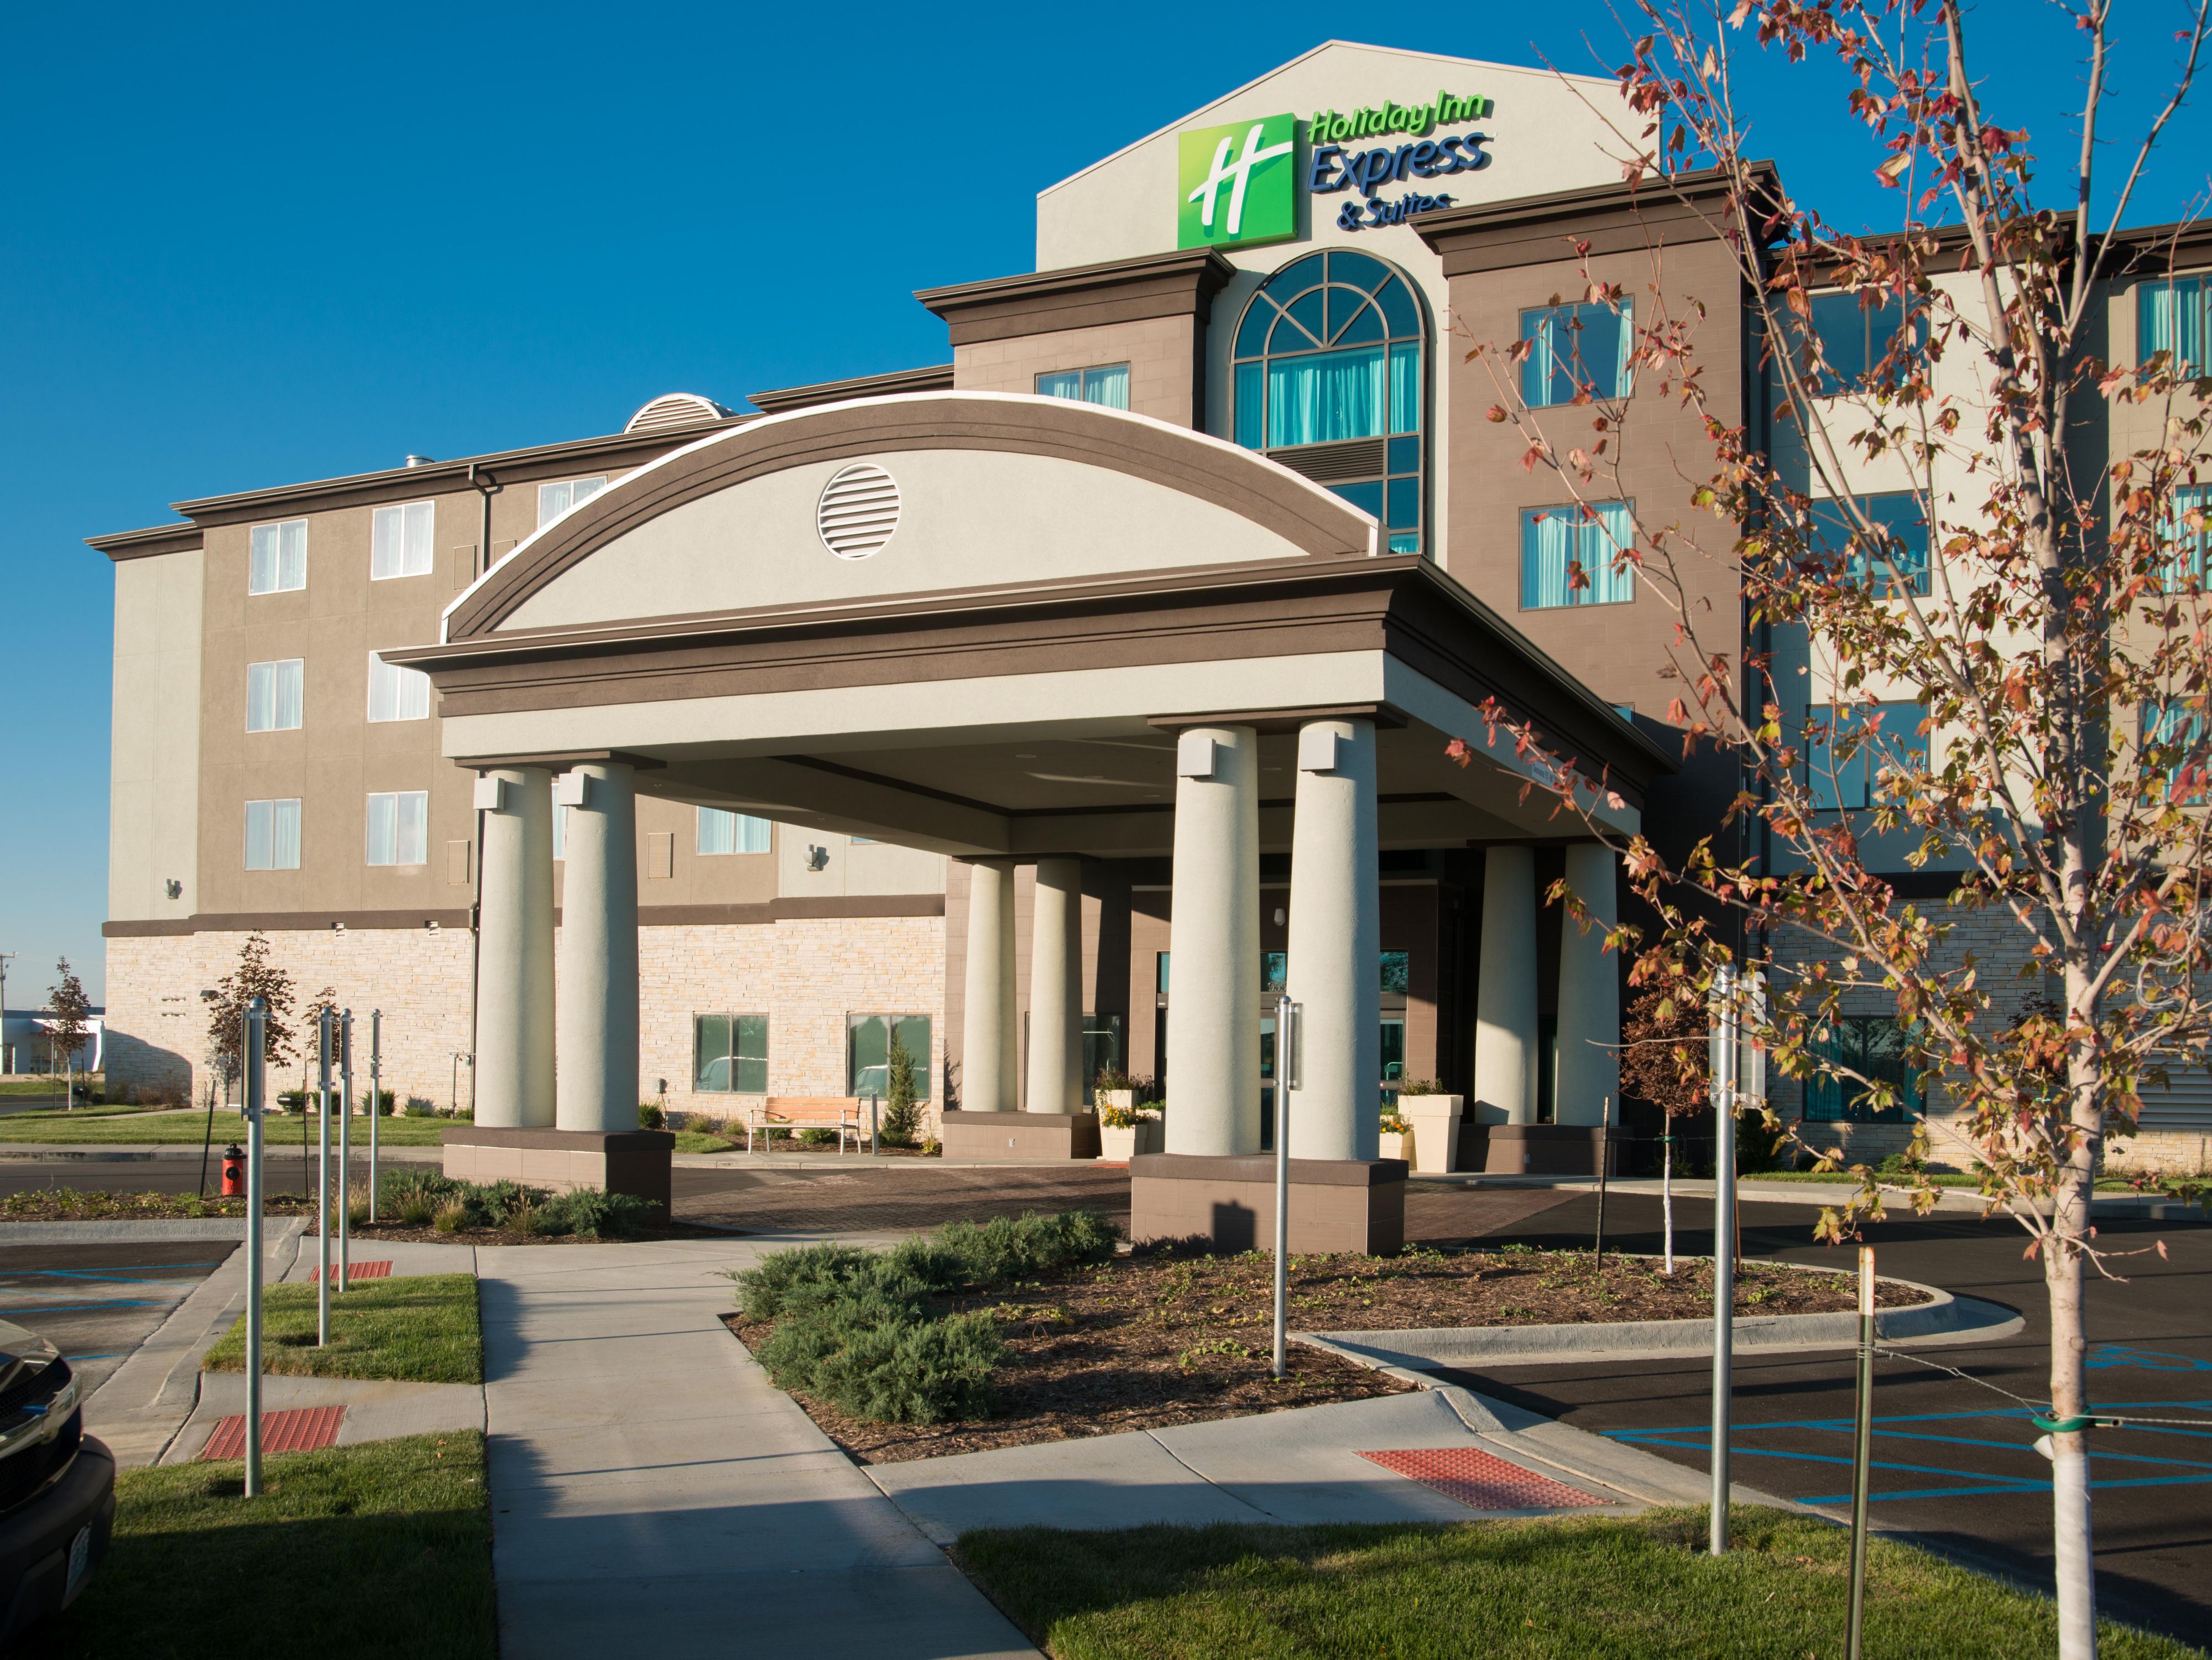 Holiday Inn Express And Suites Kansas City 4777730686 4x3